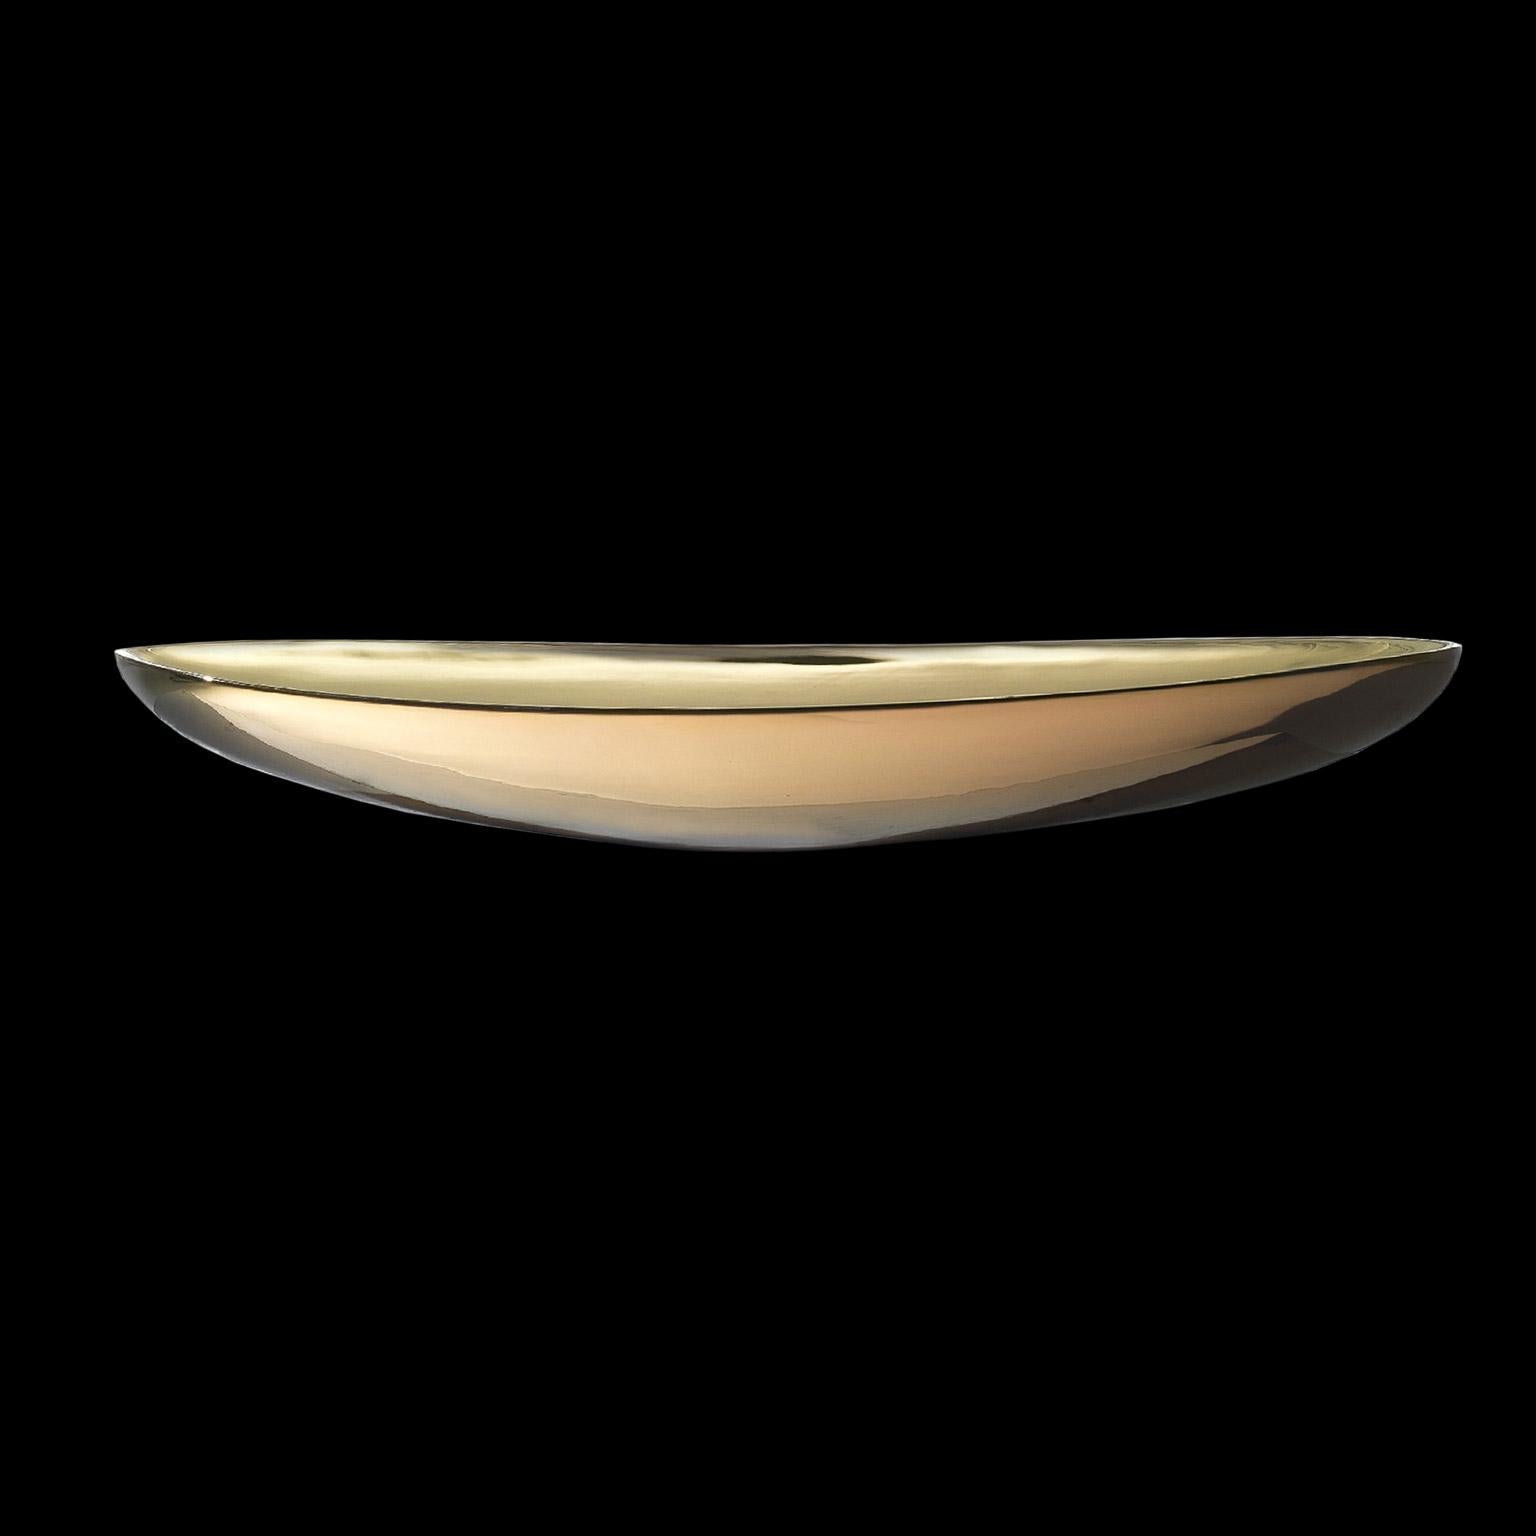 Ceramic oval plate handcrafted in bronze outside and 24-karat gold inside
COSMOS, code K011, measures: 86.0 cm. x 30.5 x H. 10.0 cm.